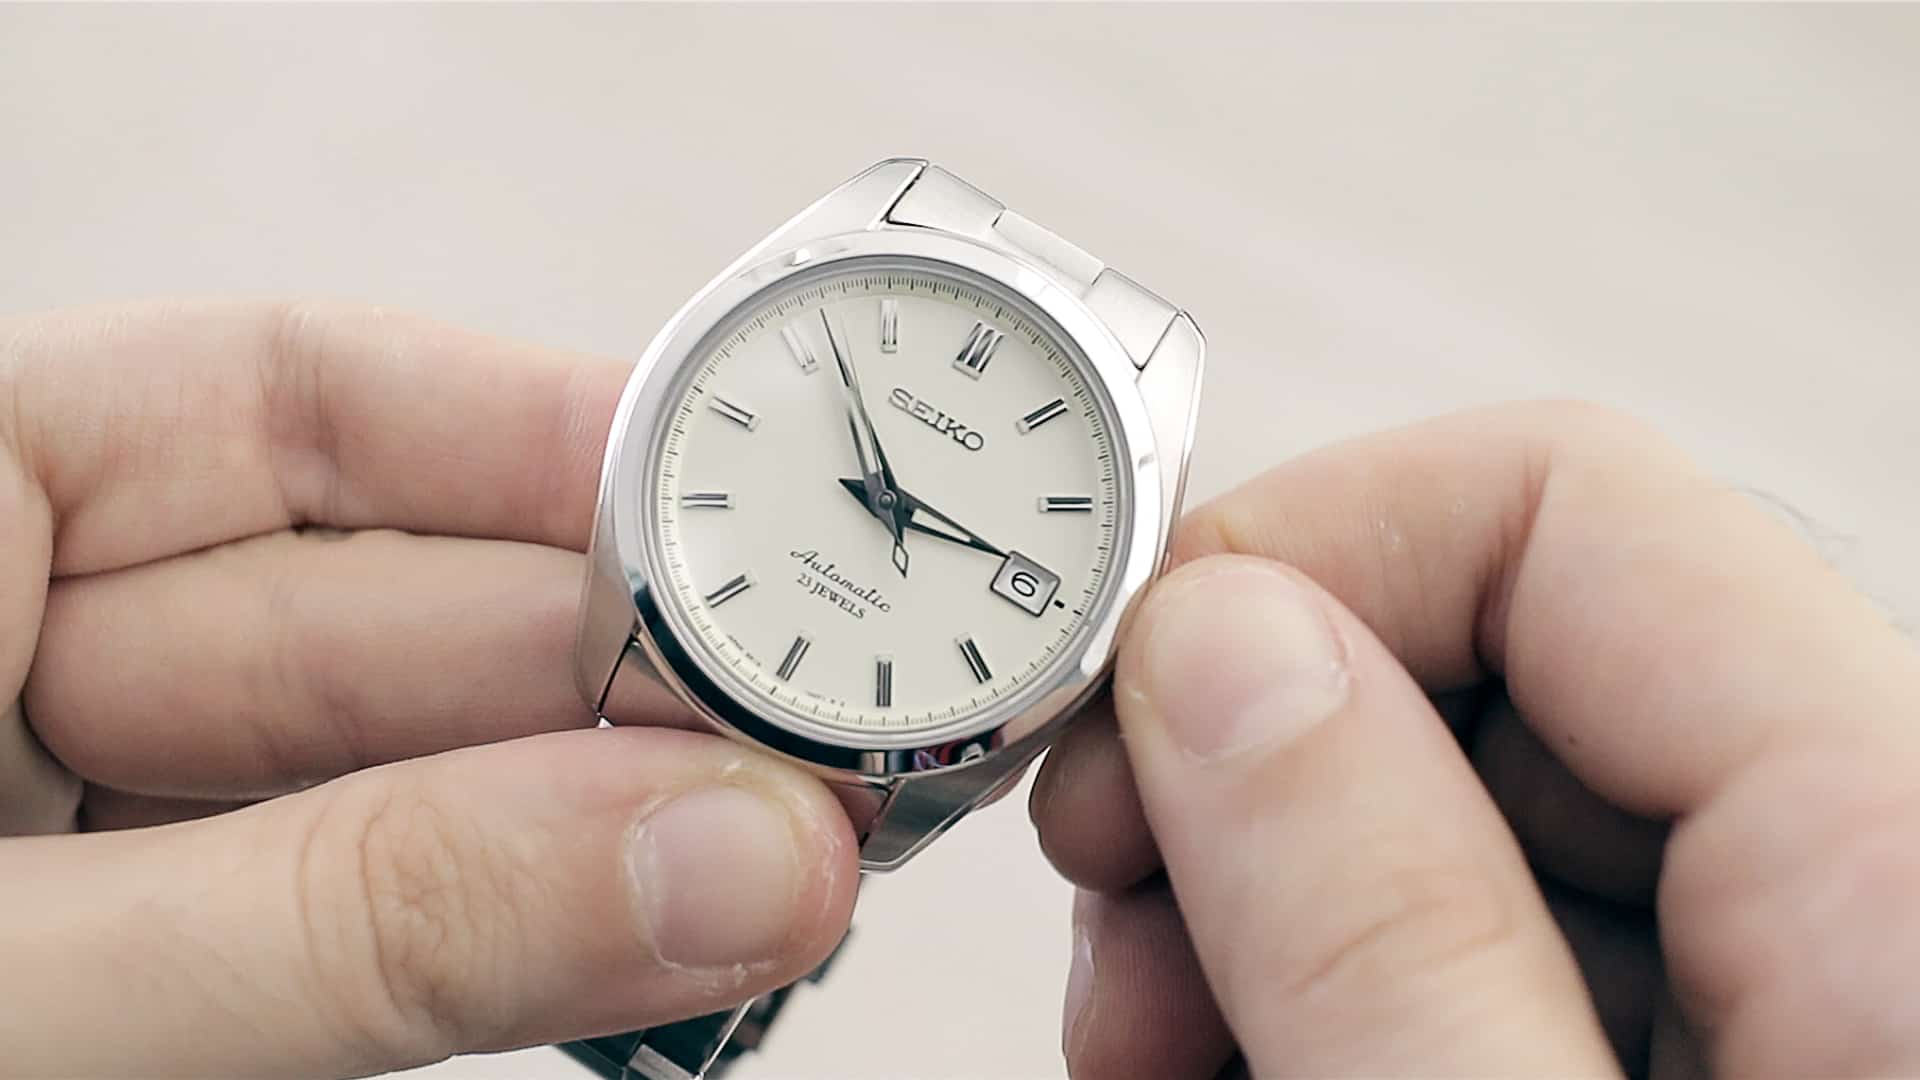 How To Manually Wind A Watch